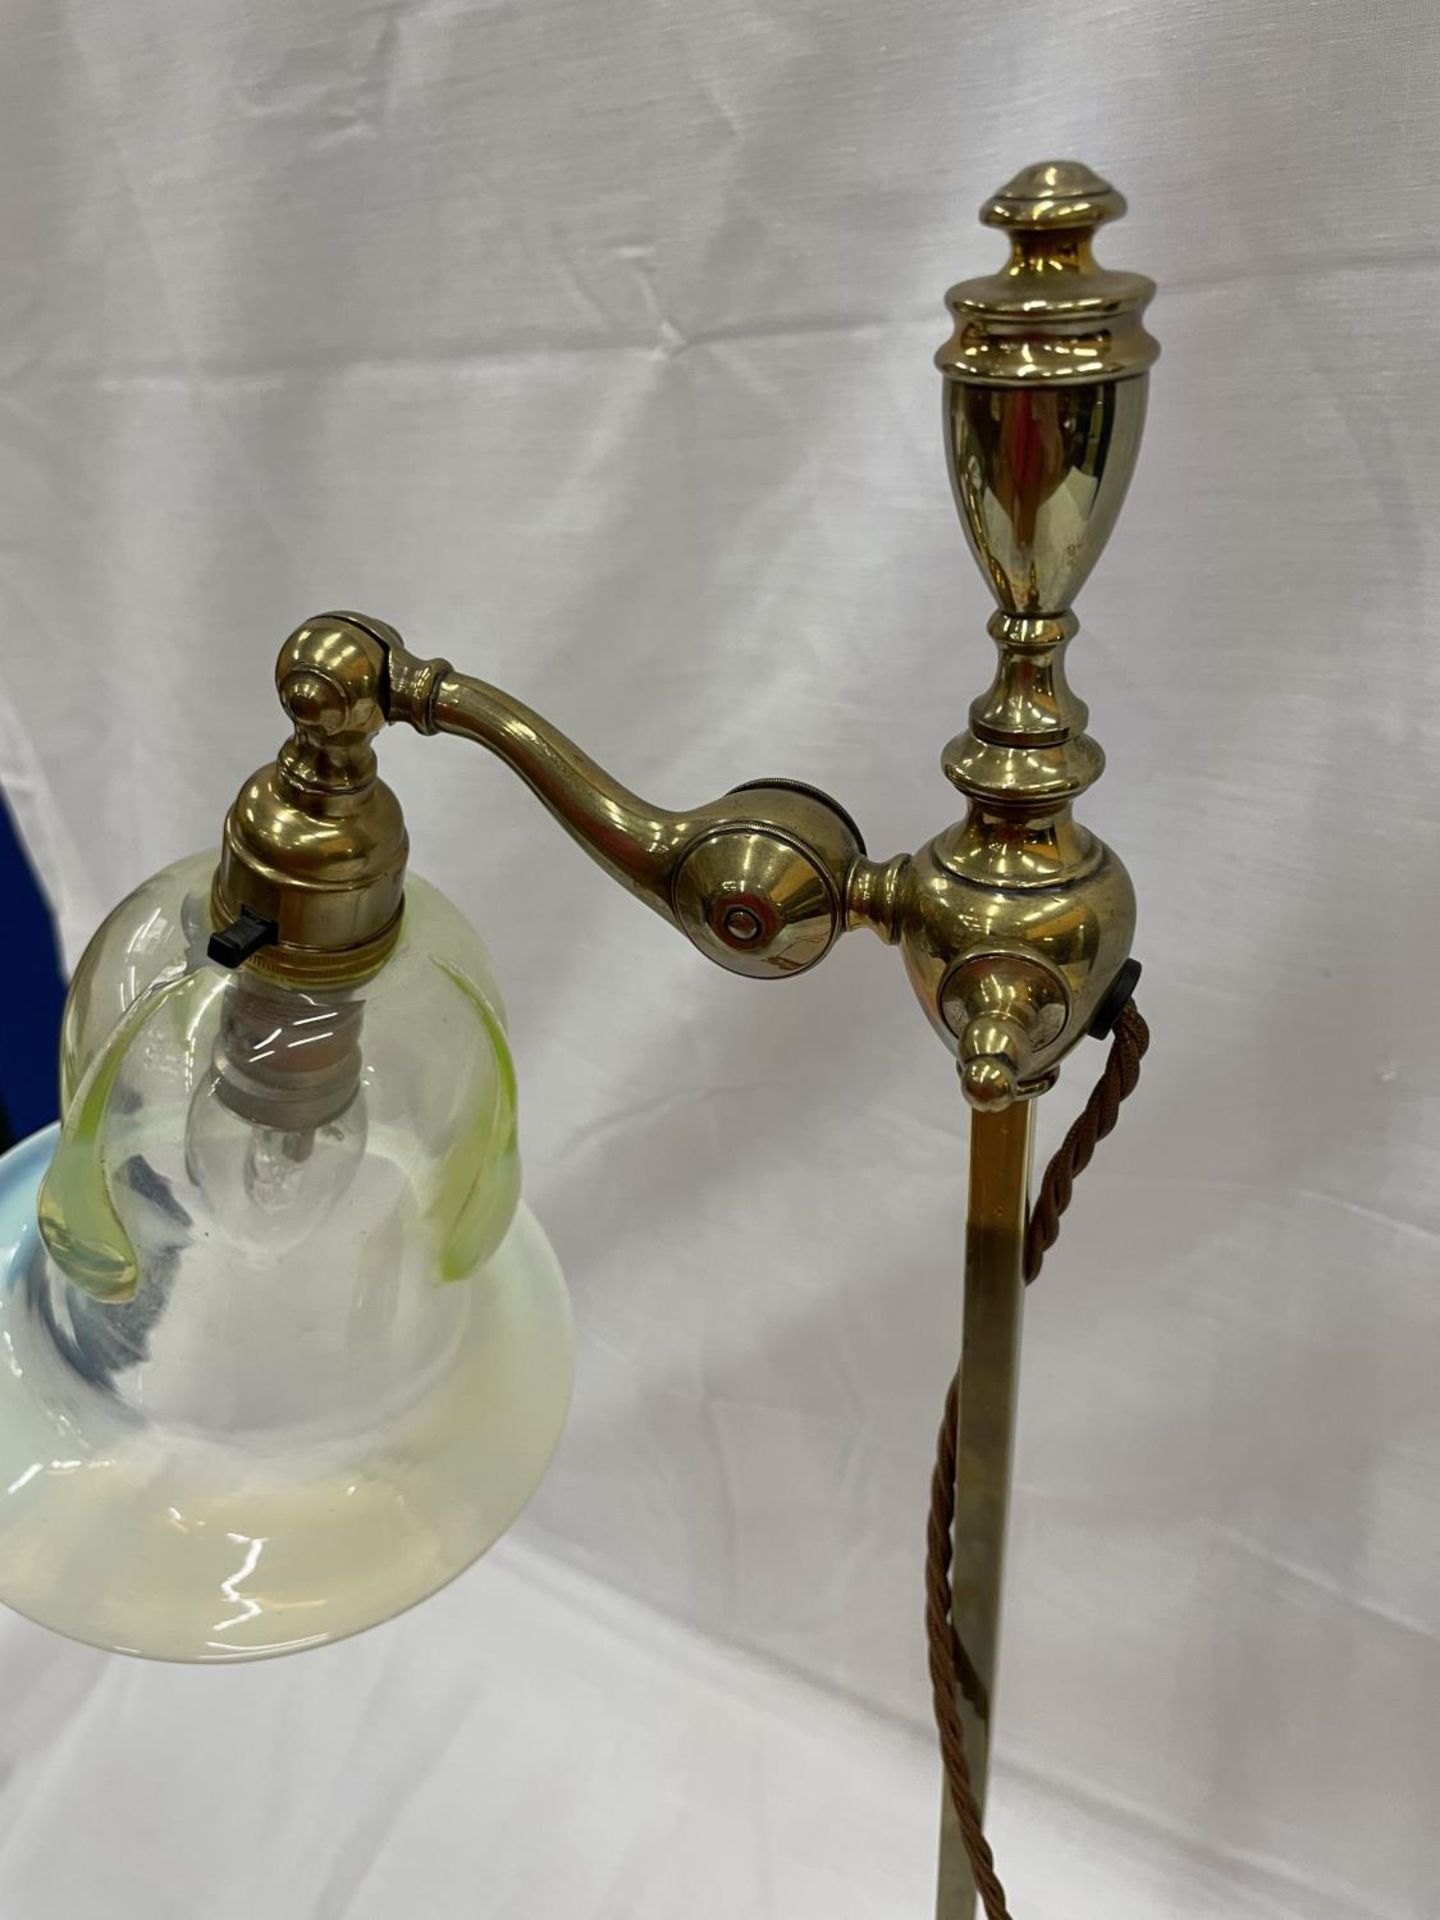 A HEAVY ANTIQUE ADJUSTABLE BRASS DESK LAMP WITH AN UNUSUAL GLASS SHADE - Image 5 of 6